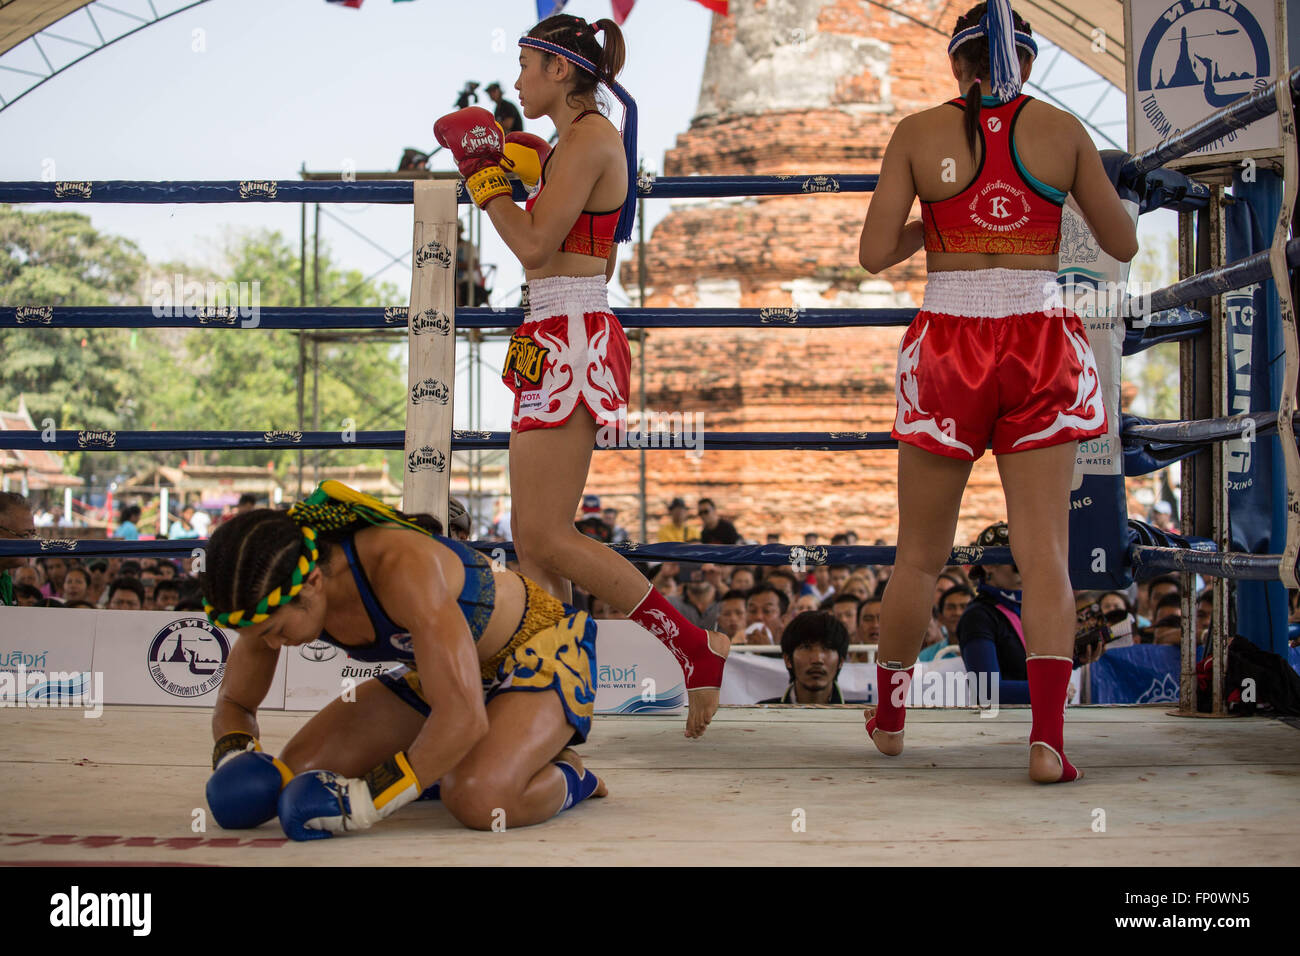 Ayutthaya, Ayutthaya, Thailand. 17th Mar, 2016. This picture shows women performing a ritual dance before the fight during the 12th World Wai Kru Muay Thai Ceremony.The 12th World Wai Kru Muay Thai Ceremony is being held near the famous Wat Maha That Temple in Ayutthaya Historical Park and attract every year more than 1200 Muay Thai fighters from 57 countries to showcase some of the sacred martial art rituals of Muay Thai Boxing. © Guillaume Payen/ZUMA Wire/Alamy Live News Stock Photo